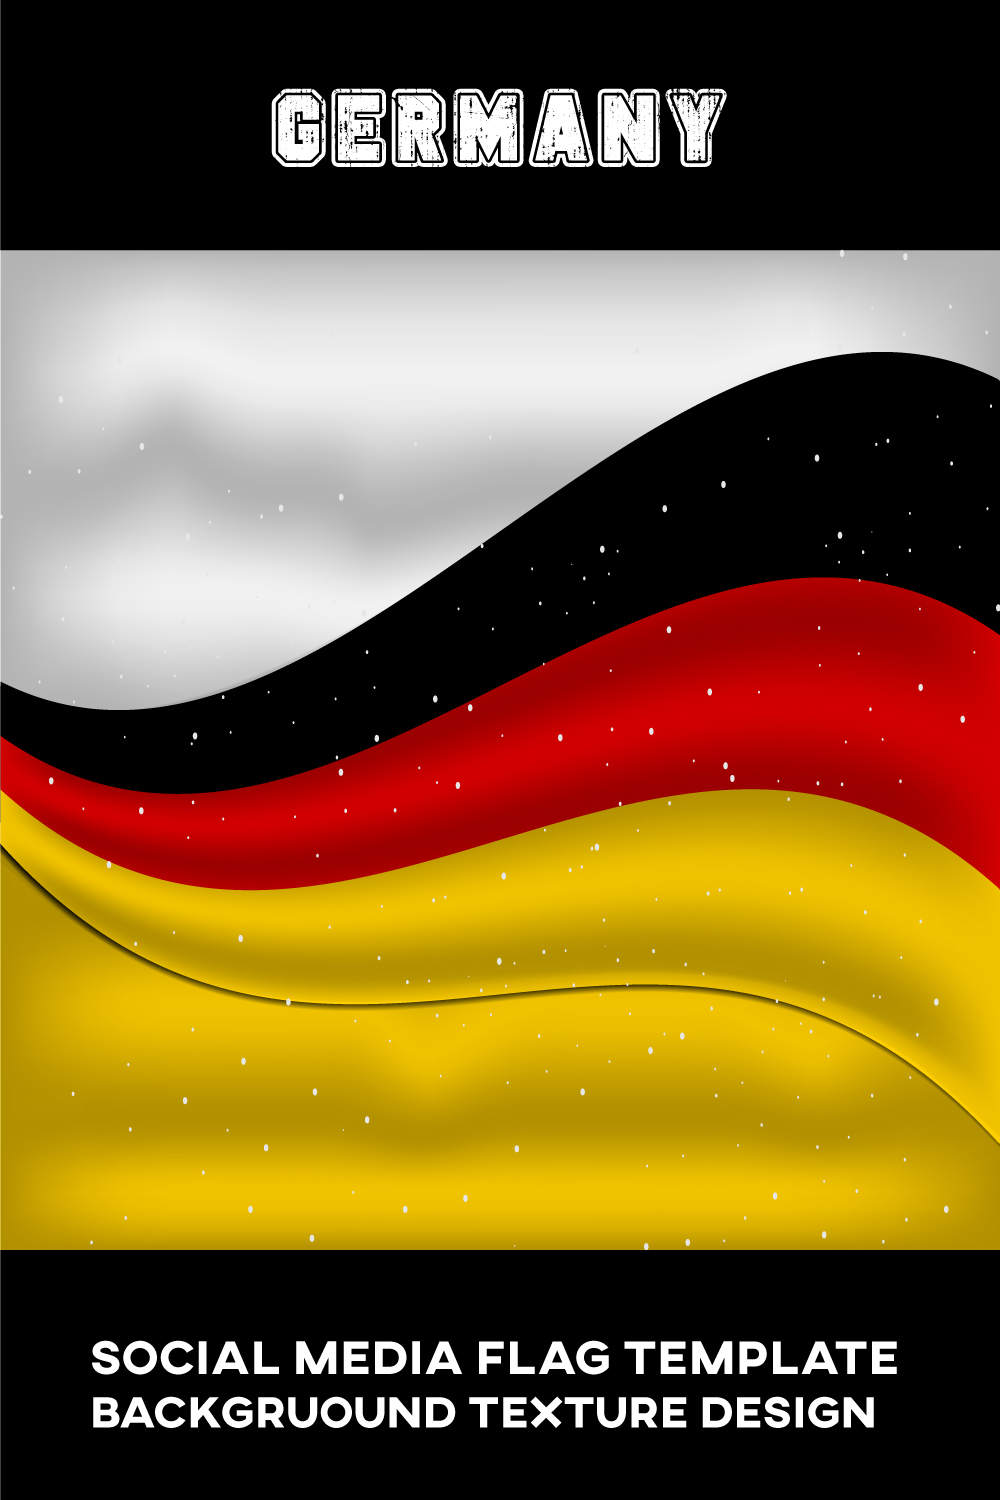 Great image of the flag of Germany.